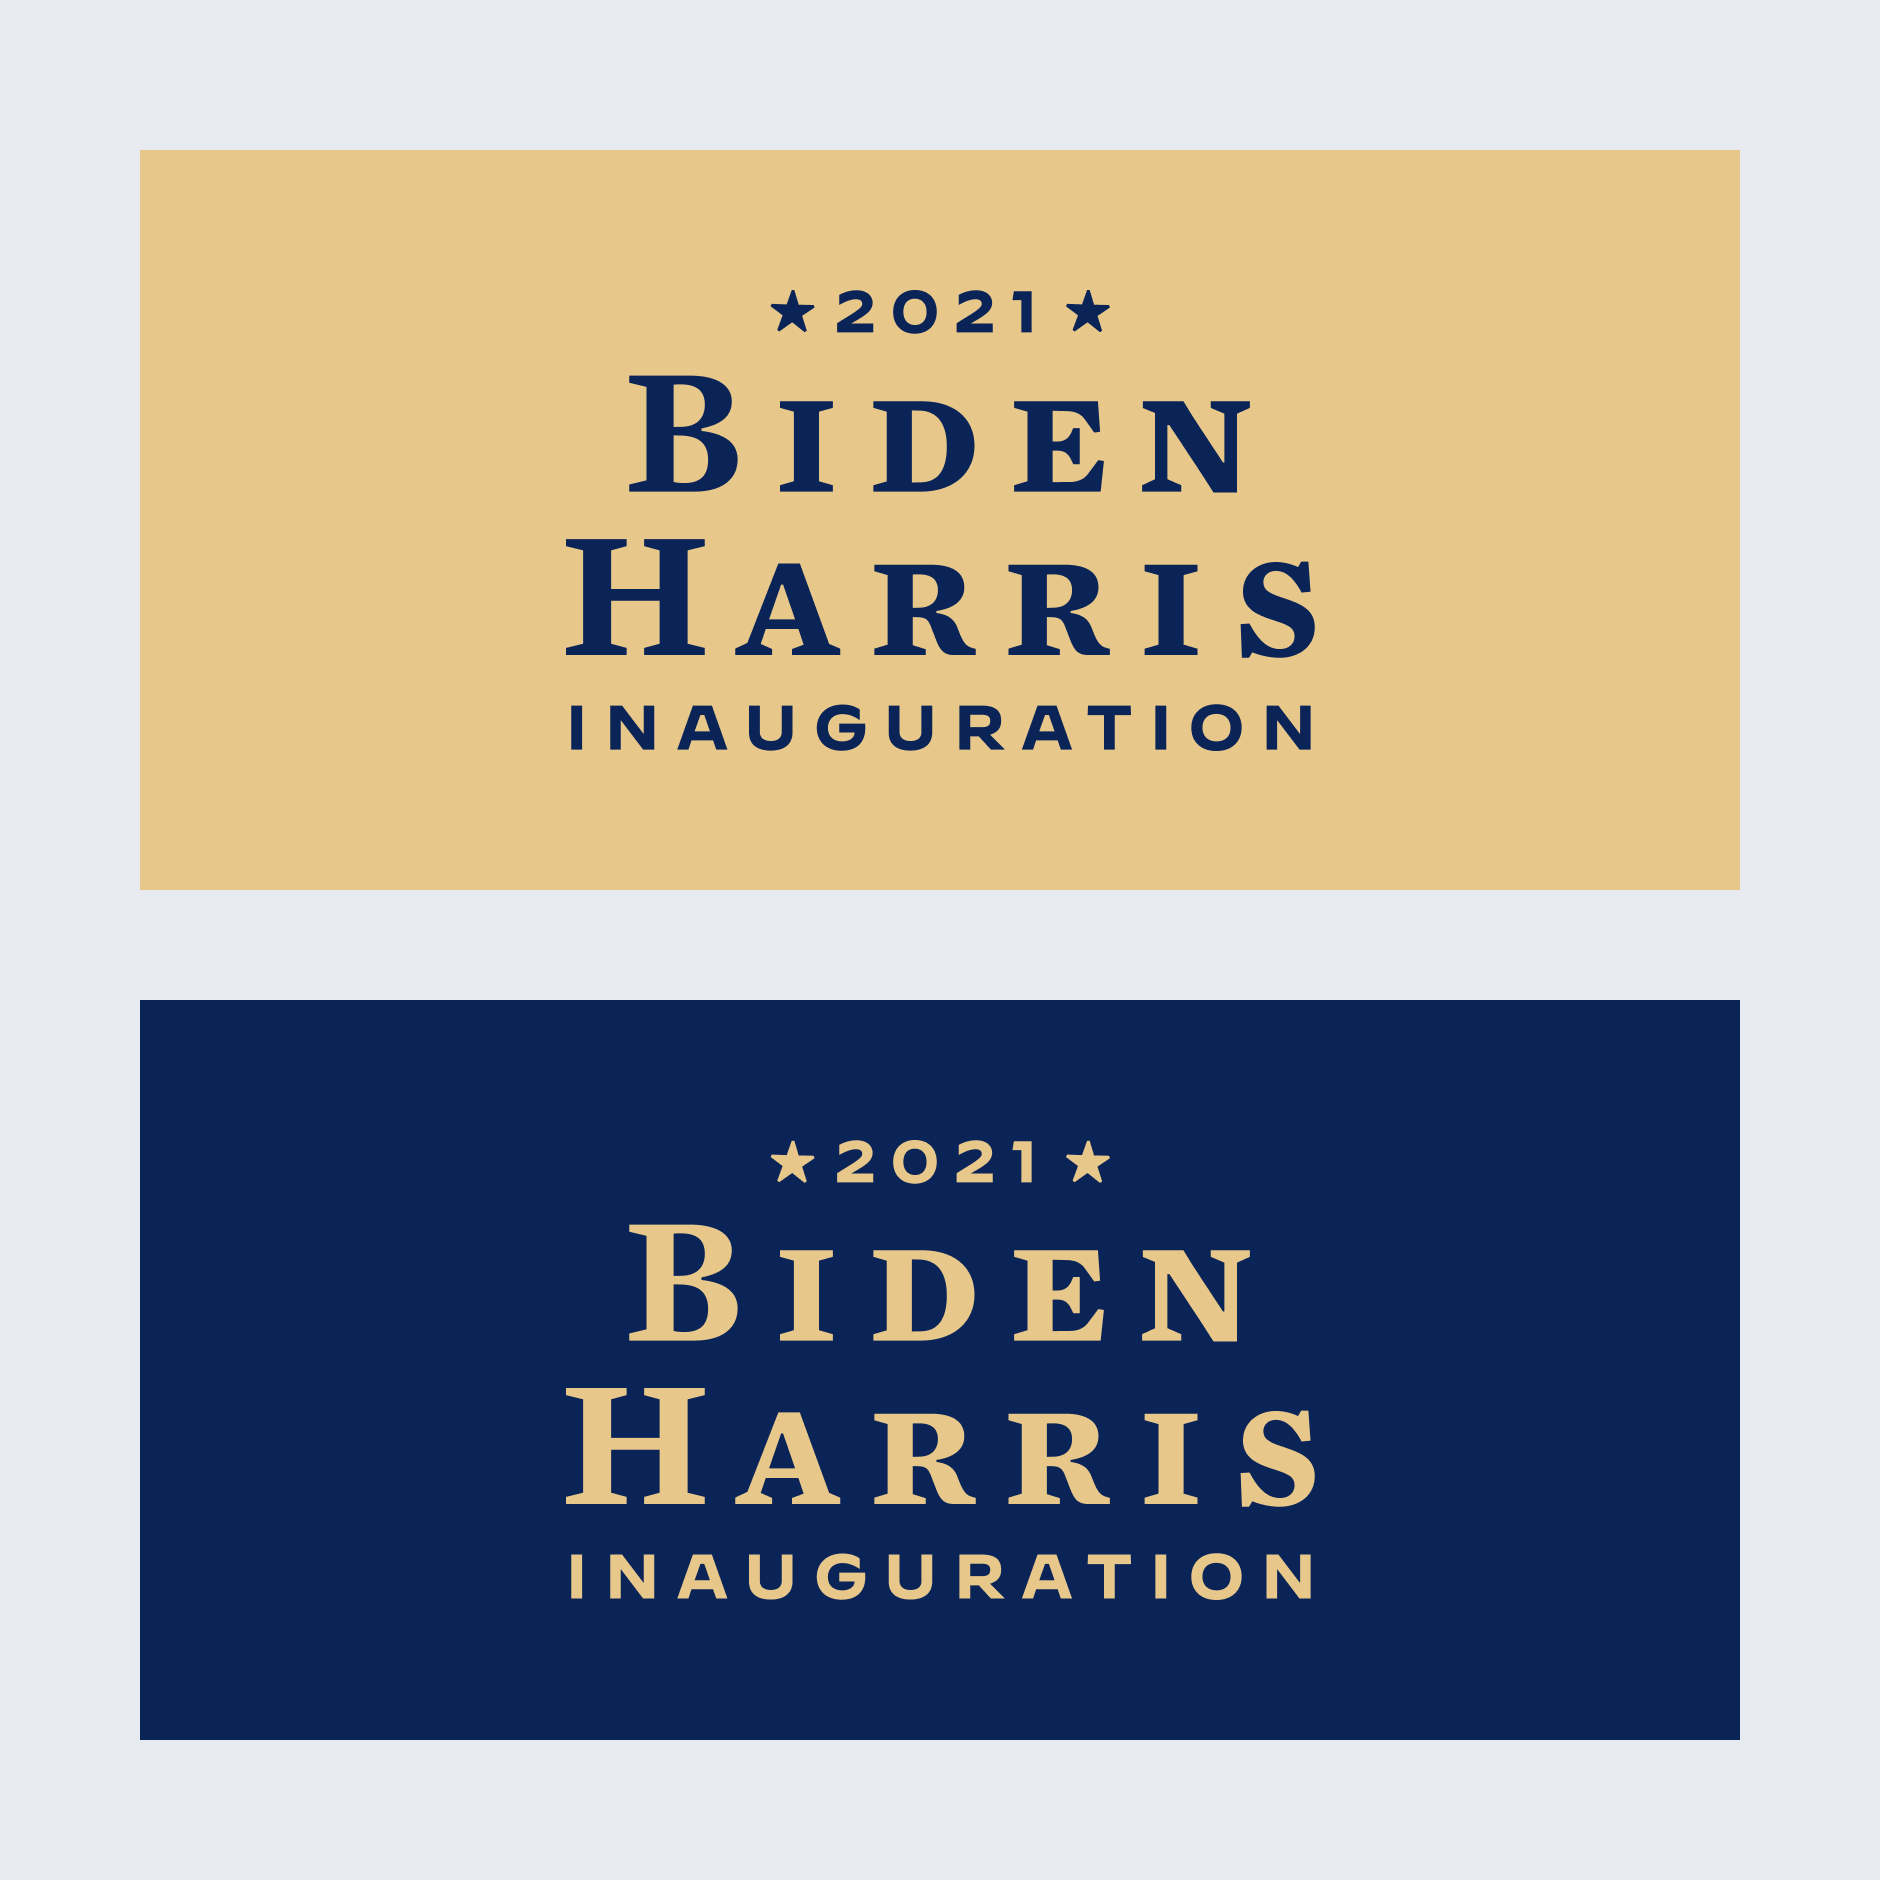 2021 Biden Harris Inauguration signs in gold and navy blue